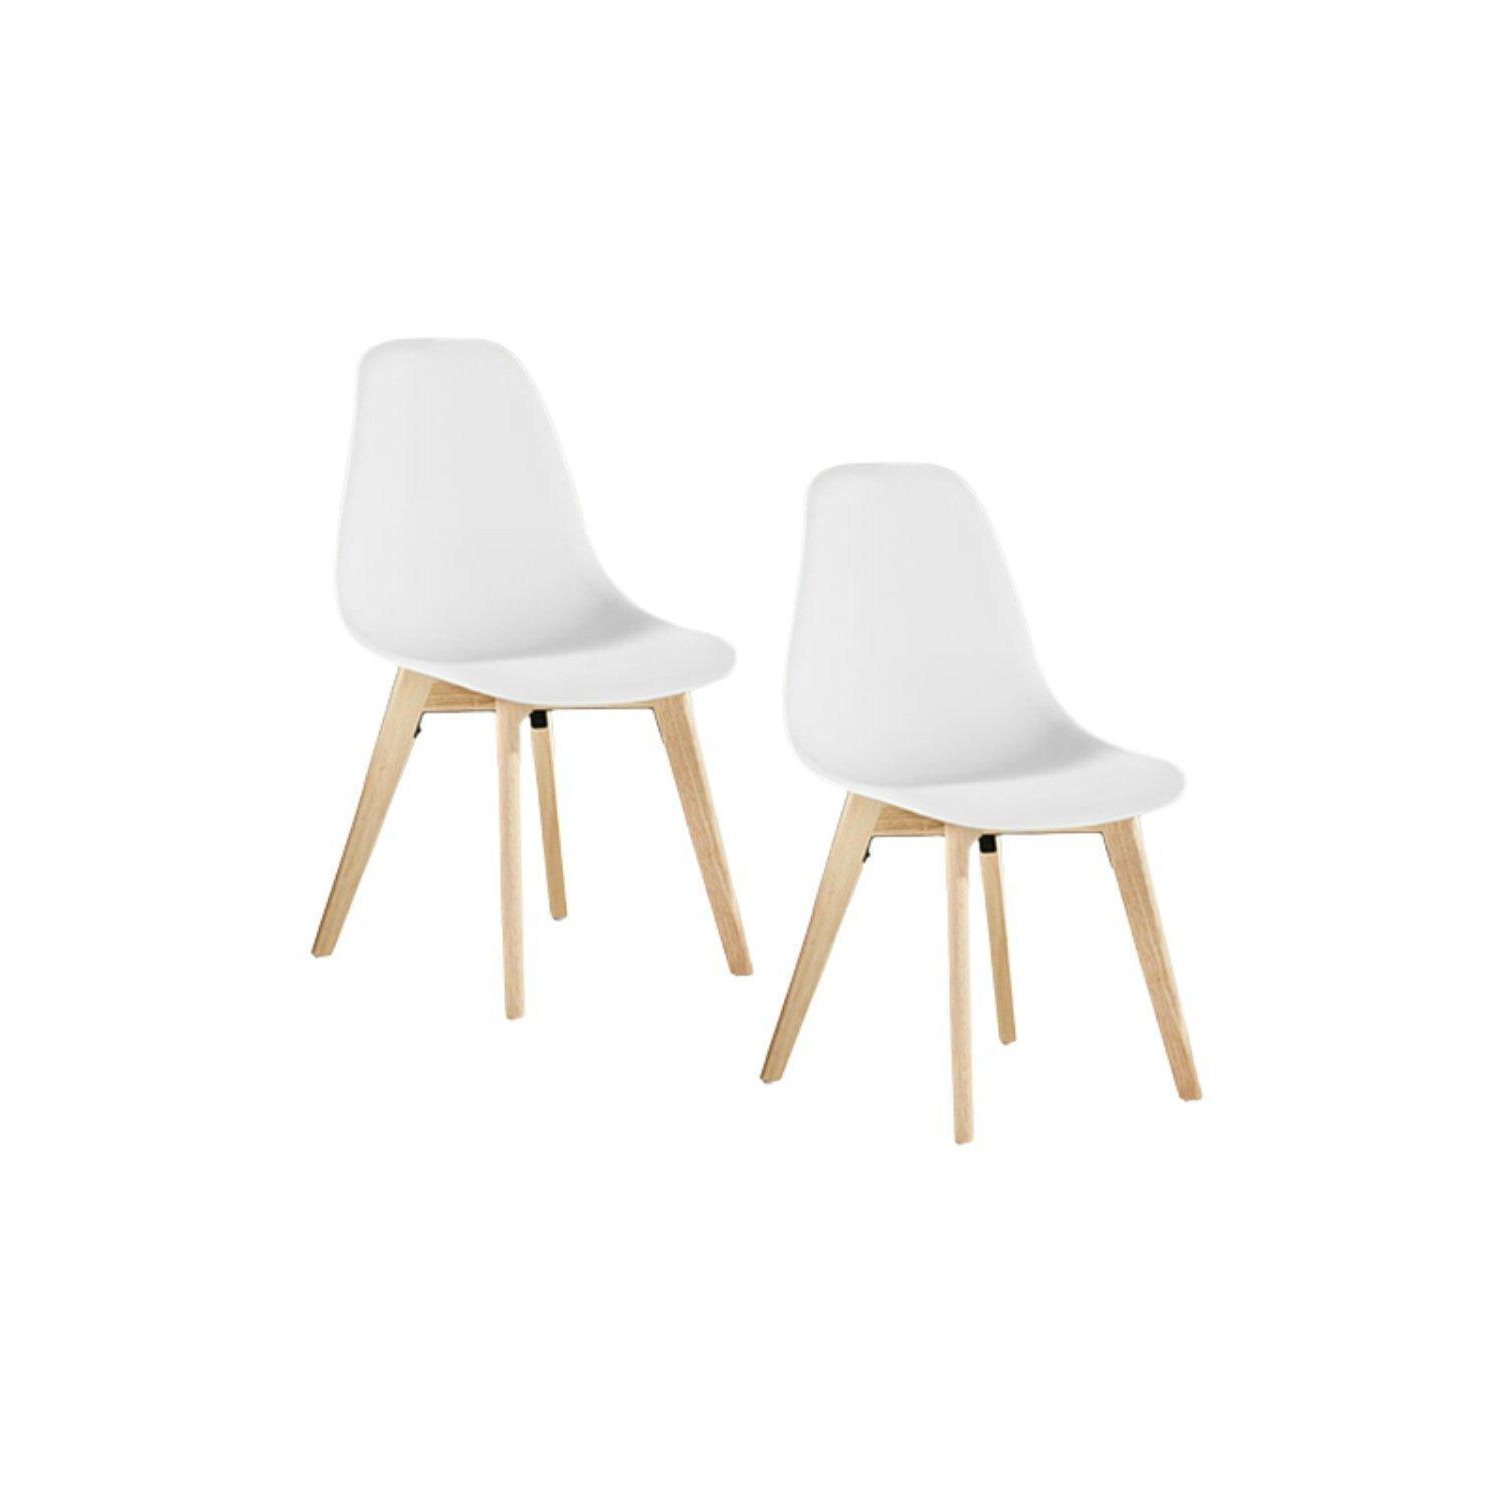 Set of 2 'Rico Modern Dining Chairs' Dining Room Plastic Chair - image 1